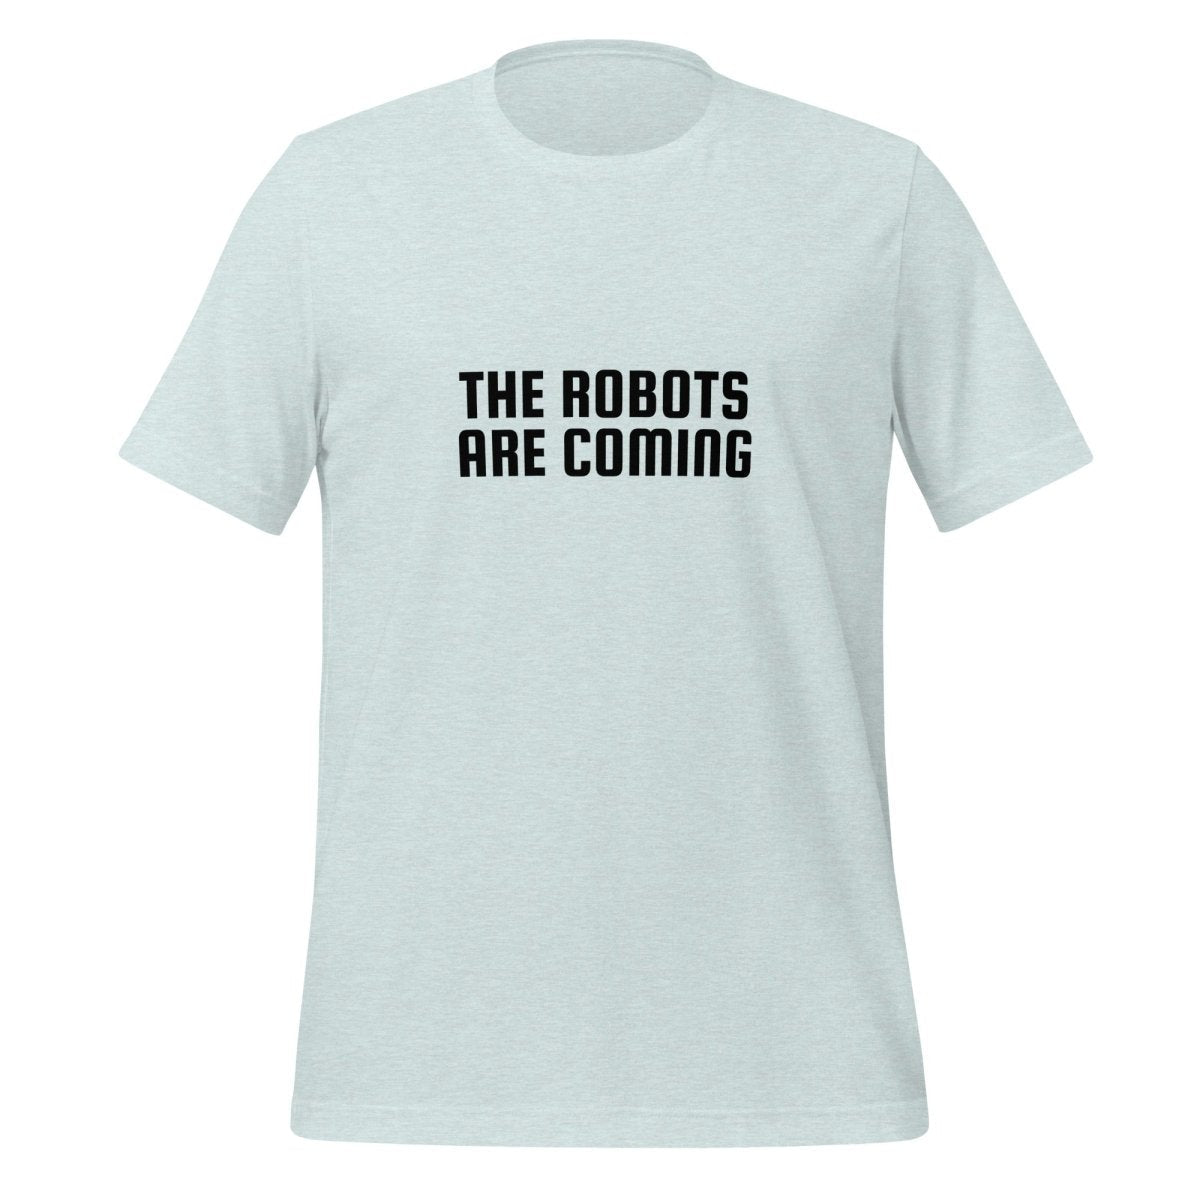 The Robots Are Coming in Black T - Shirt 2 (unisex) - Heather Prism Ice Blue - AI Store